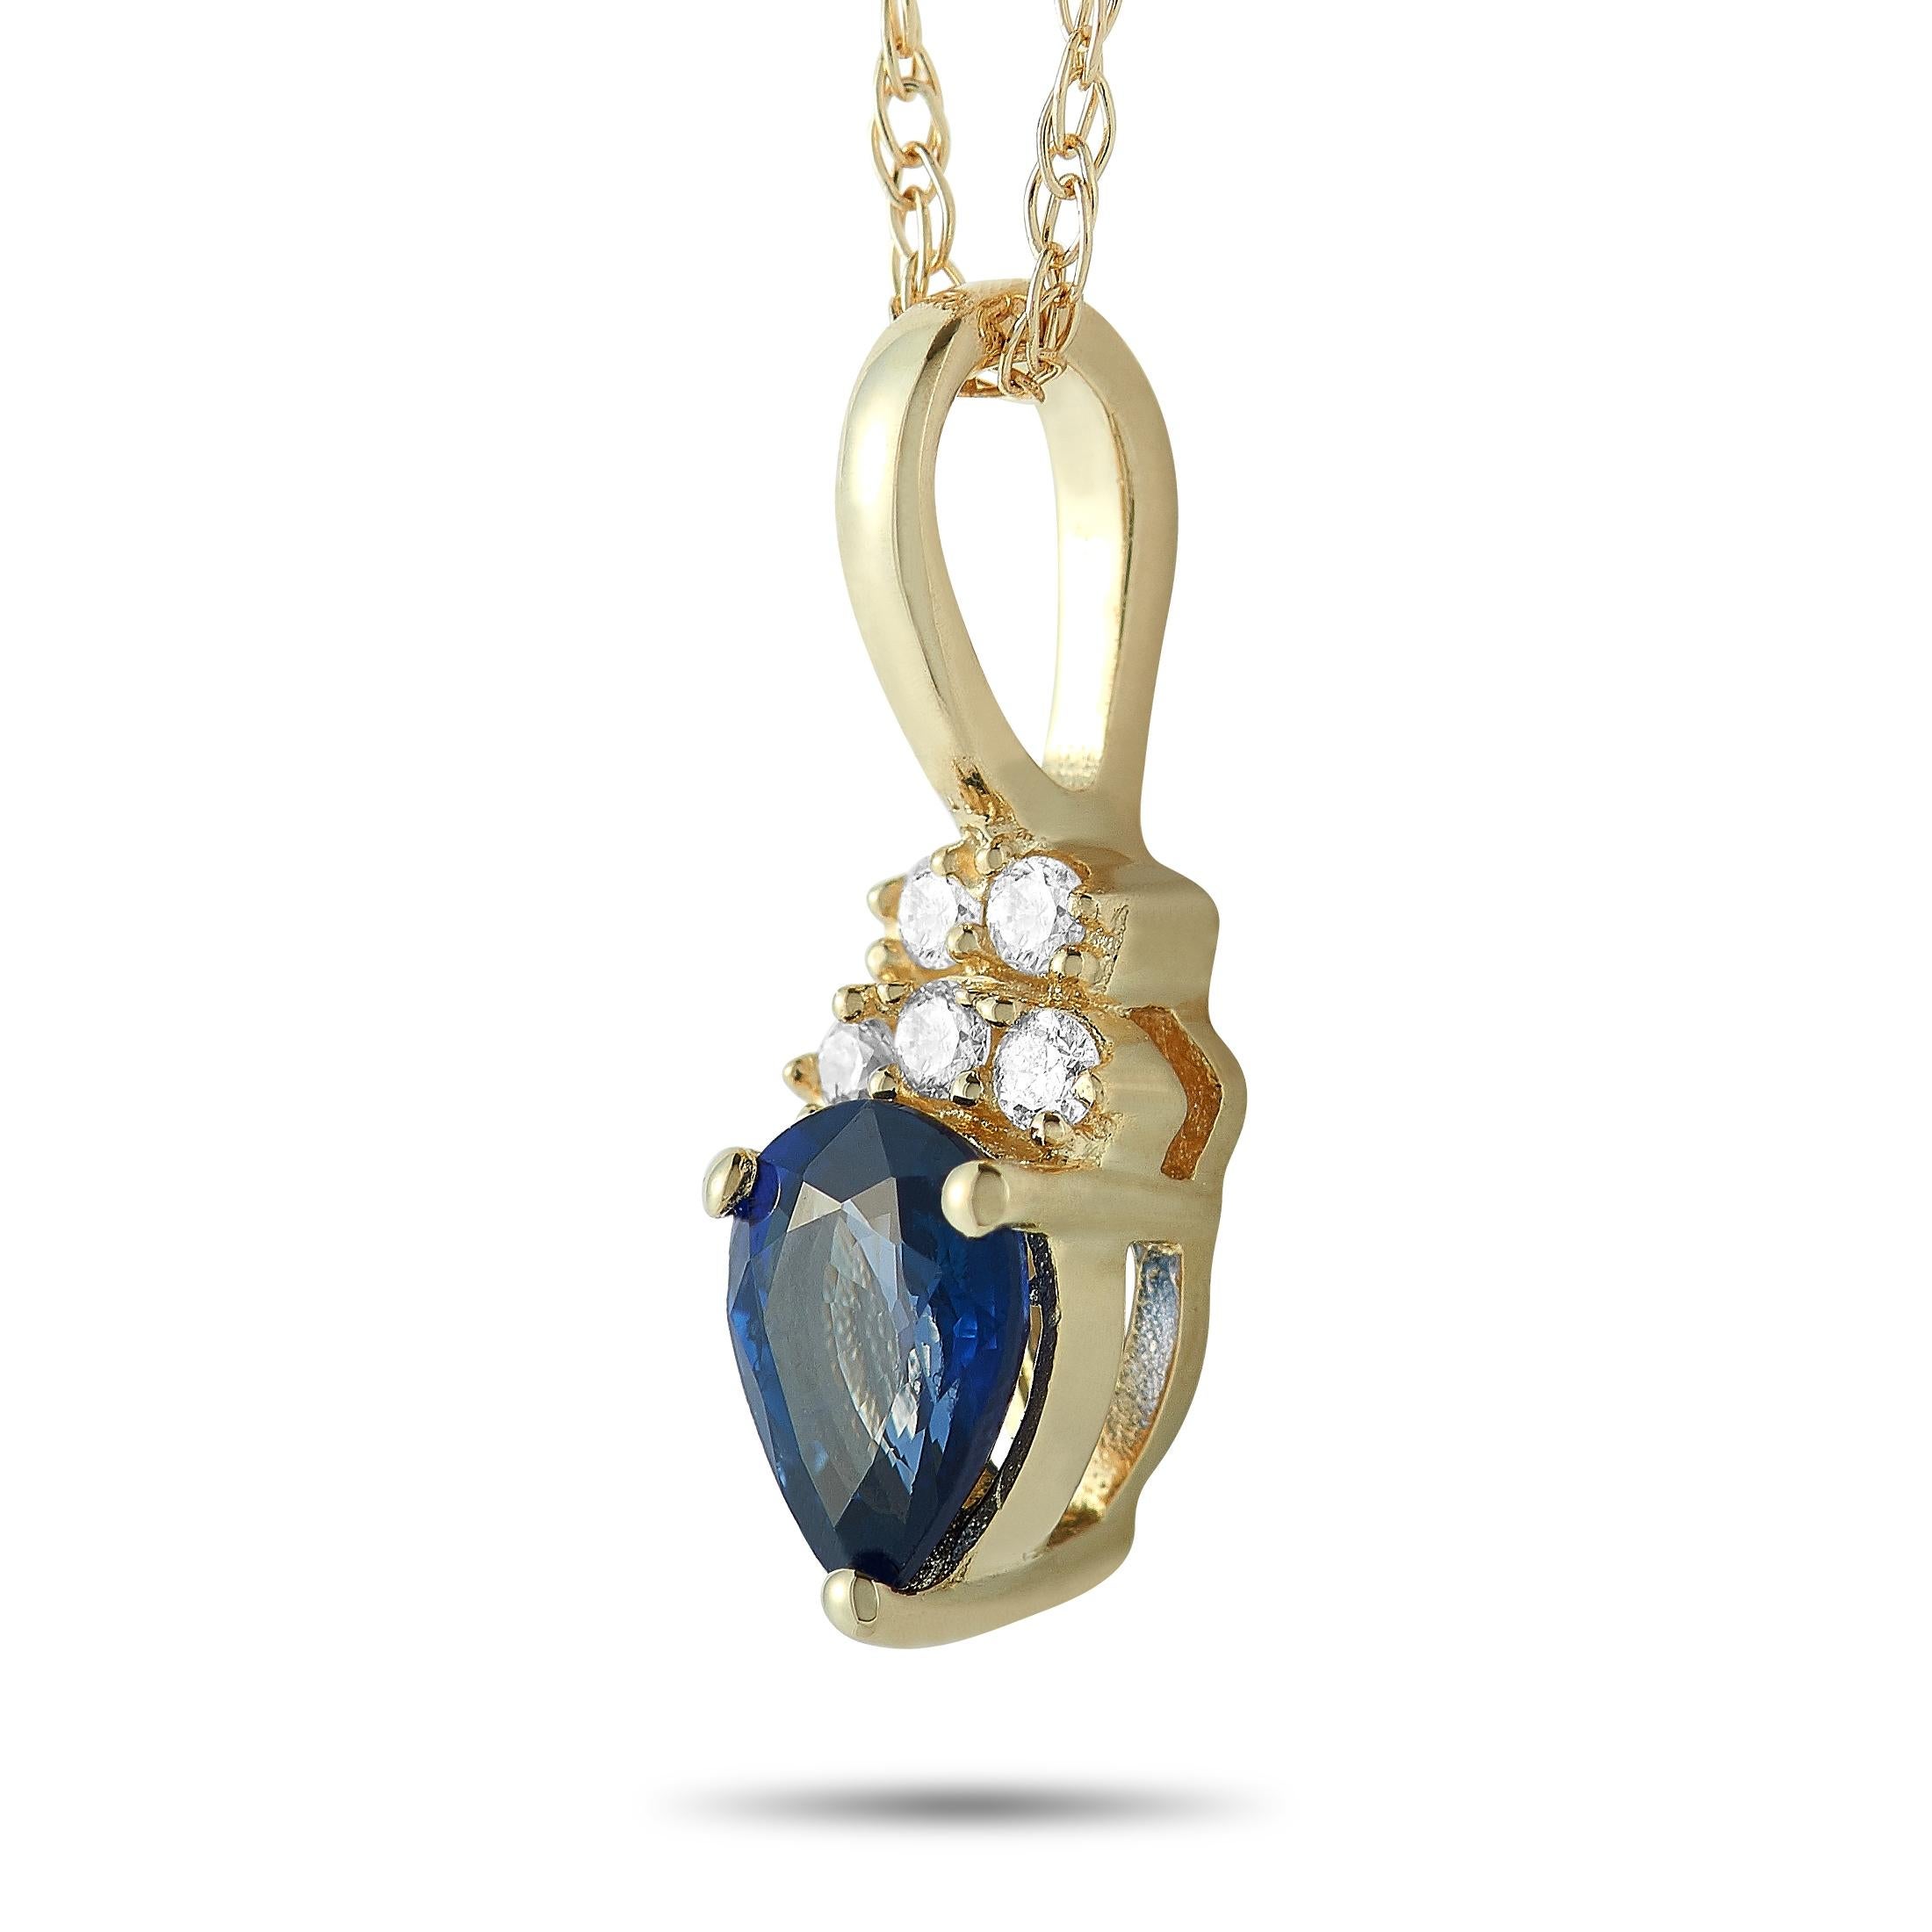 This LB Exclusive necklace is made of 14K yellow gold and embellished with a 0.23 ct sapphire and a total of 0.03 carats of diamonds. The necklace weighs 1 gram and boasts a 17” chain and a pendant that measures 0.50” in length and 0.12” in width.
